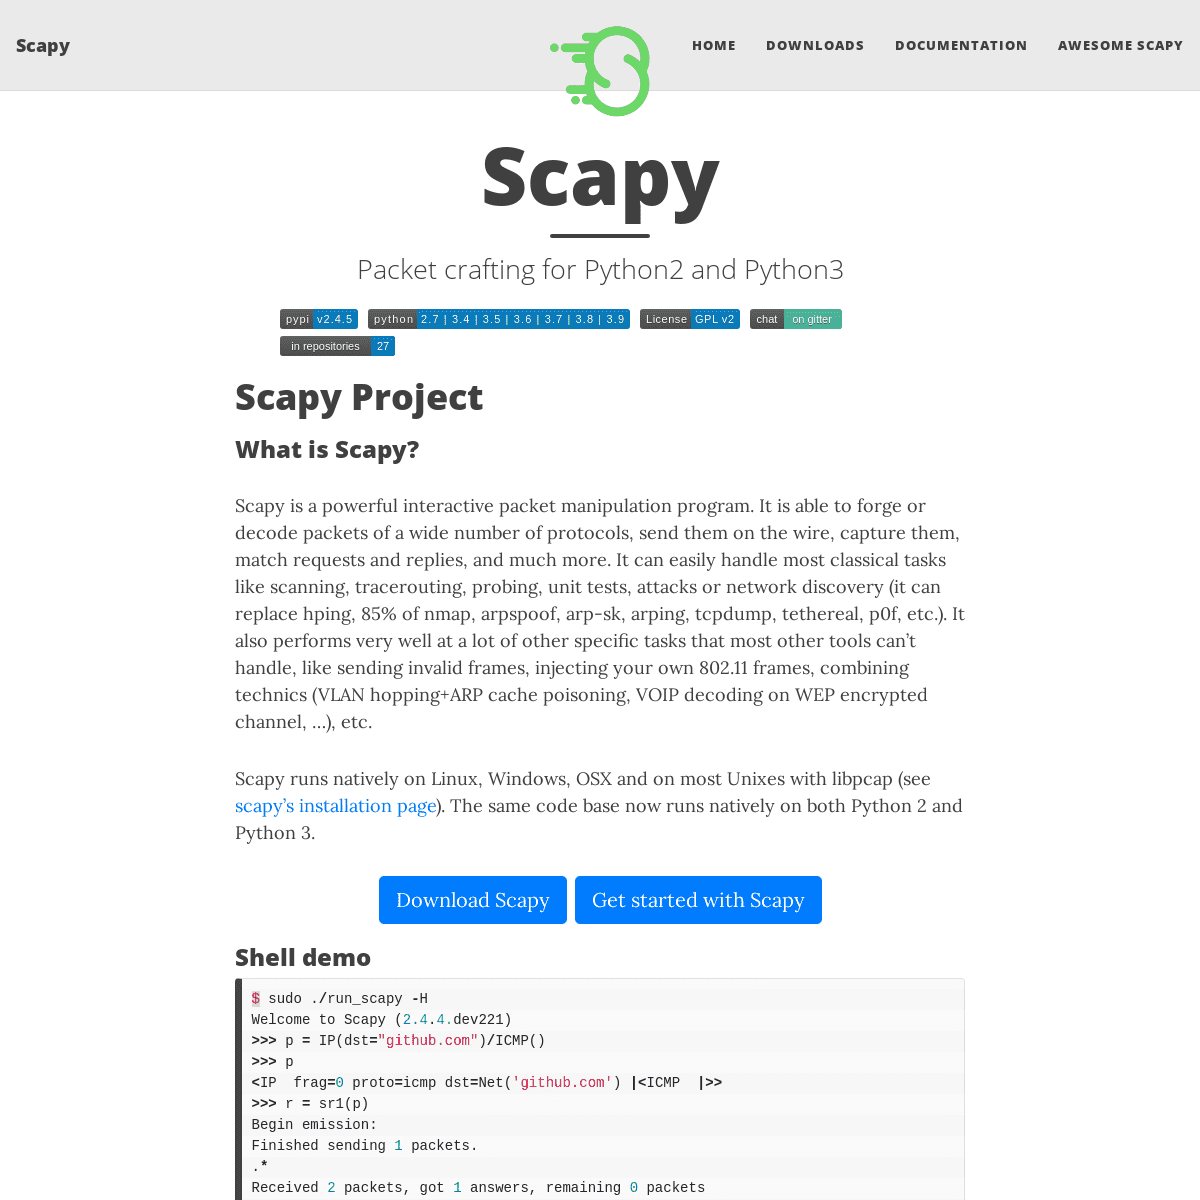 A complete backup of https://scapy.net